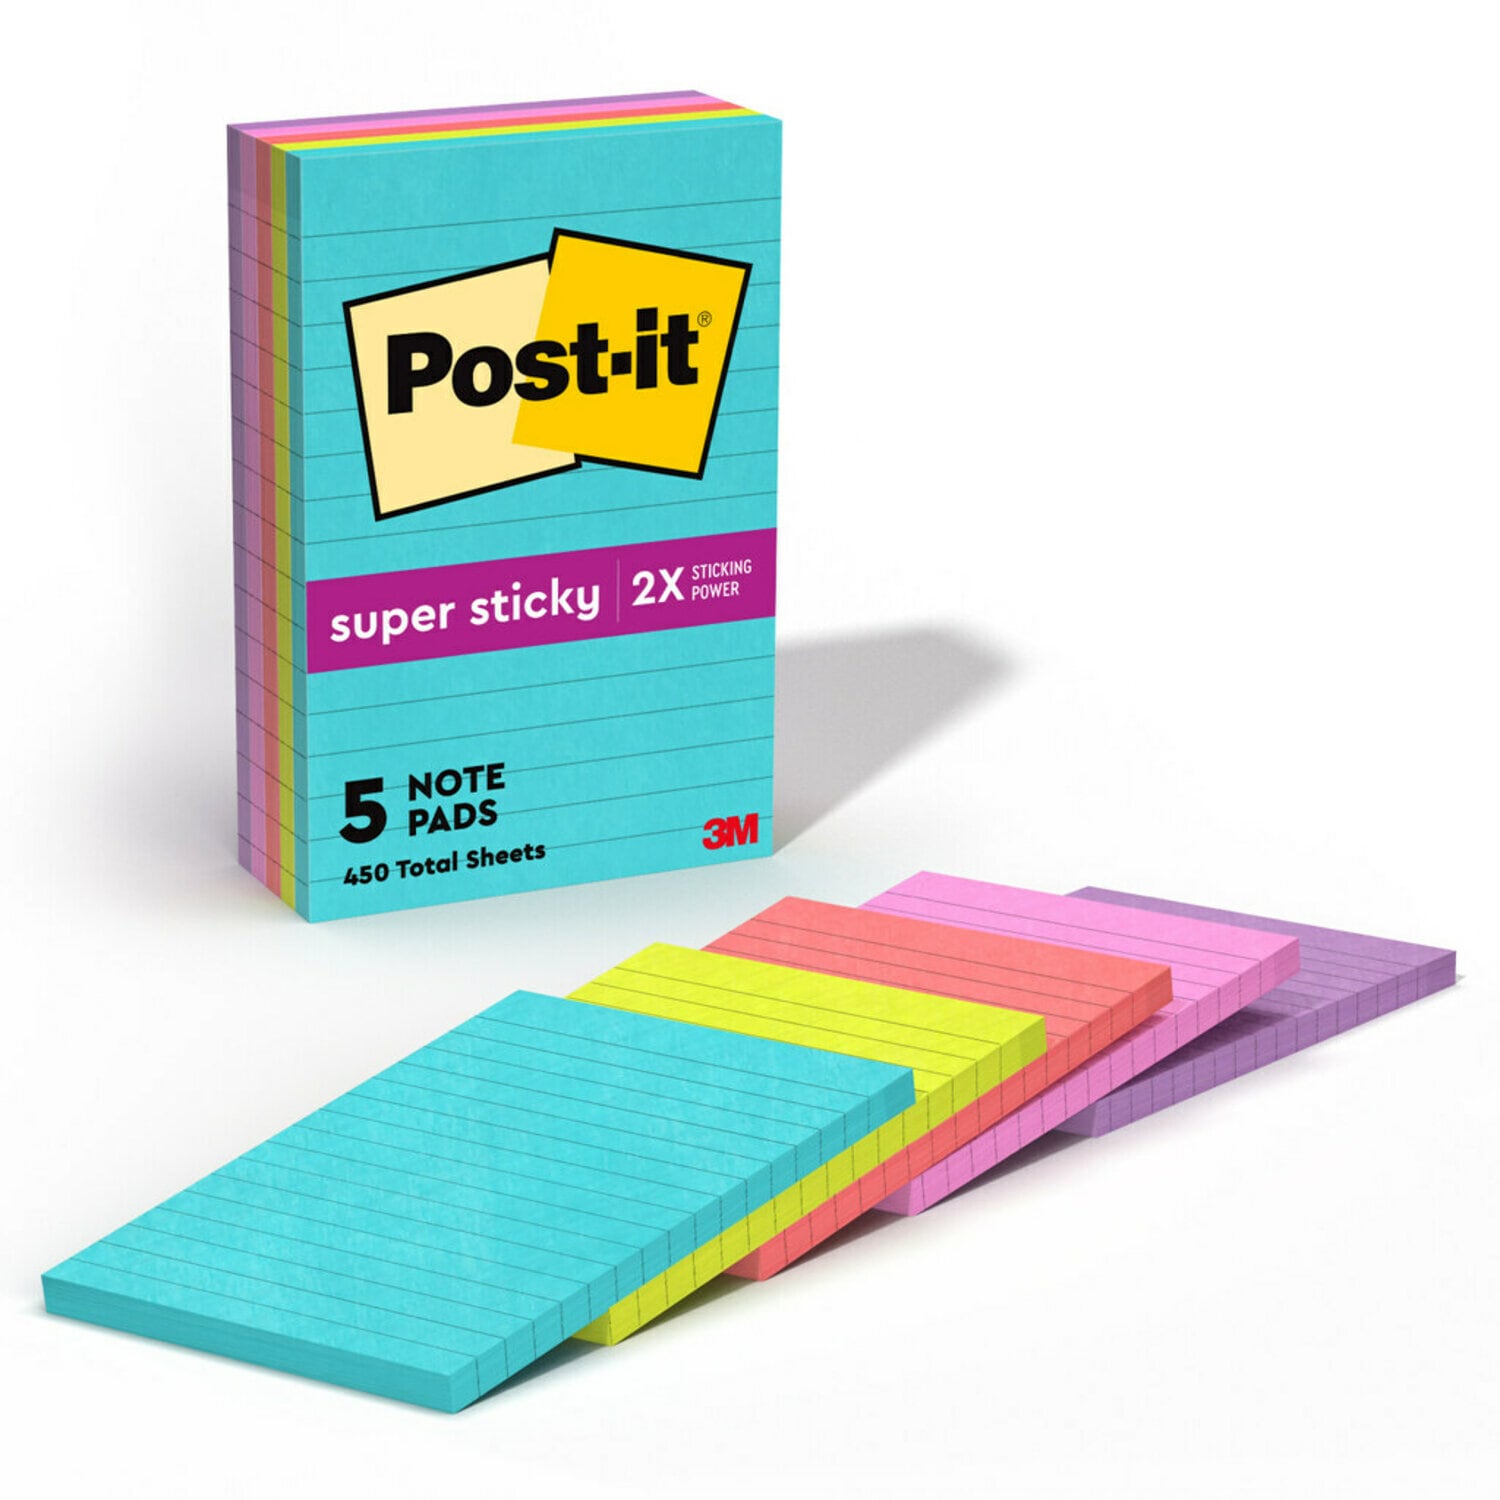 7100088278 - Post-it Super Sticky Notes 660-5SSMIA, 4 in x 6 in (101 mm x 152 mm),
Miami Collection, 8 Pads/Pack, 90 Sheets/Pad, Lined